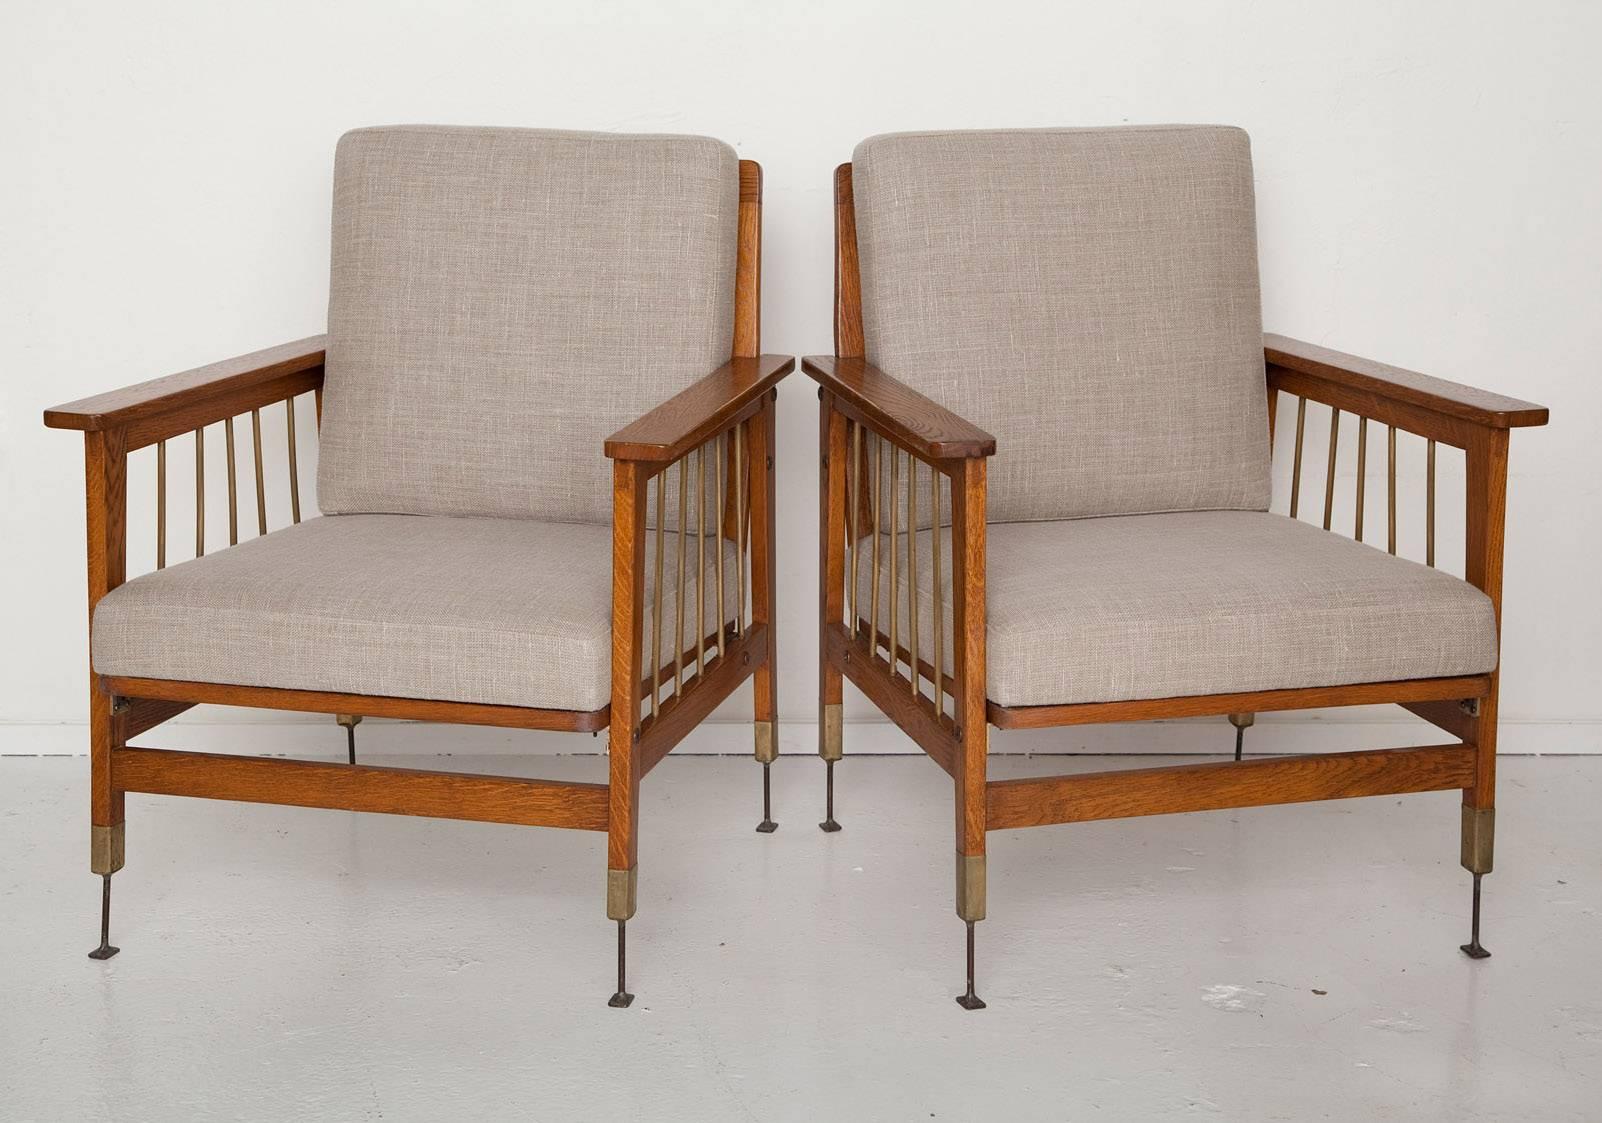 Pair of William Morris-style Arts & Crafts armchairs in quarter-sawn oak and brass with unusual 